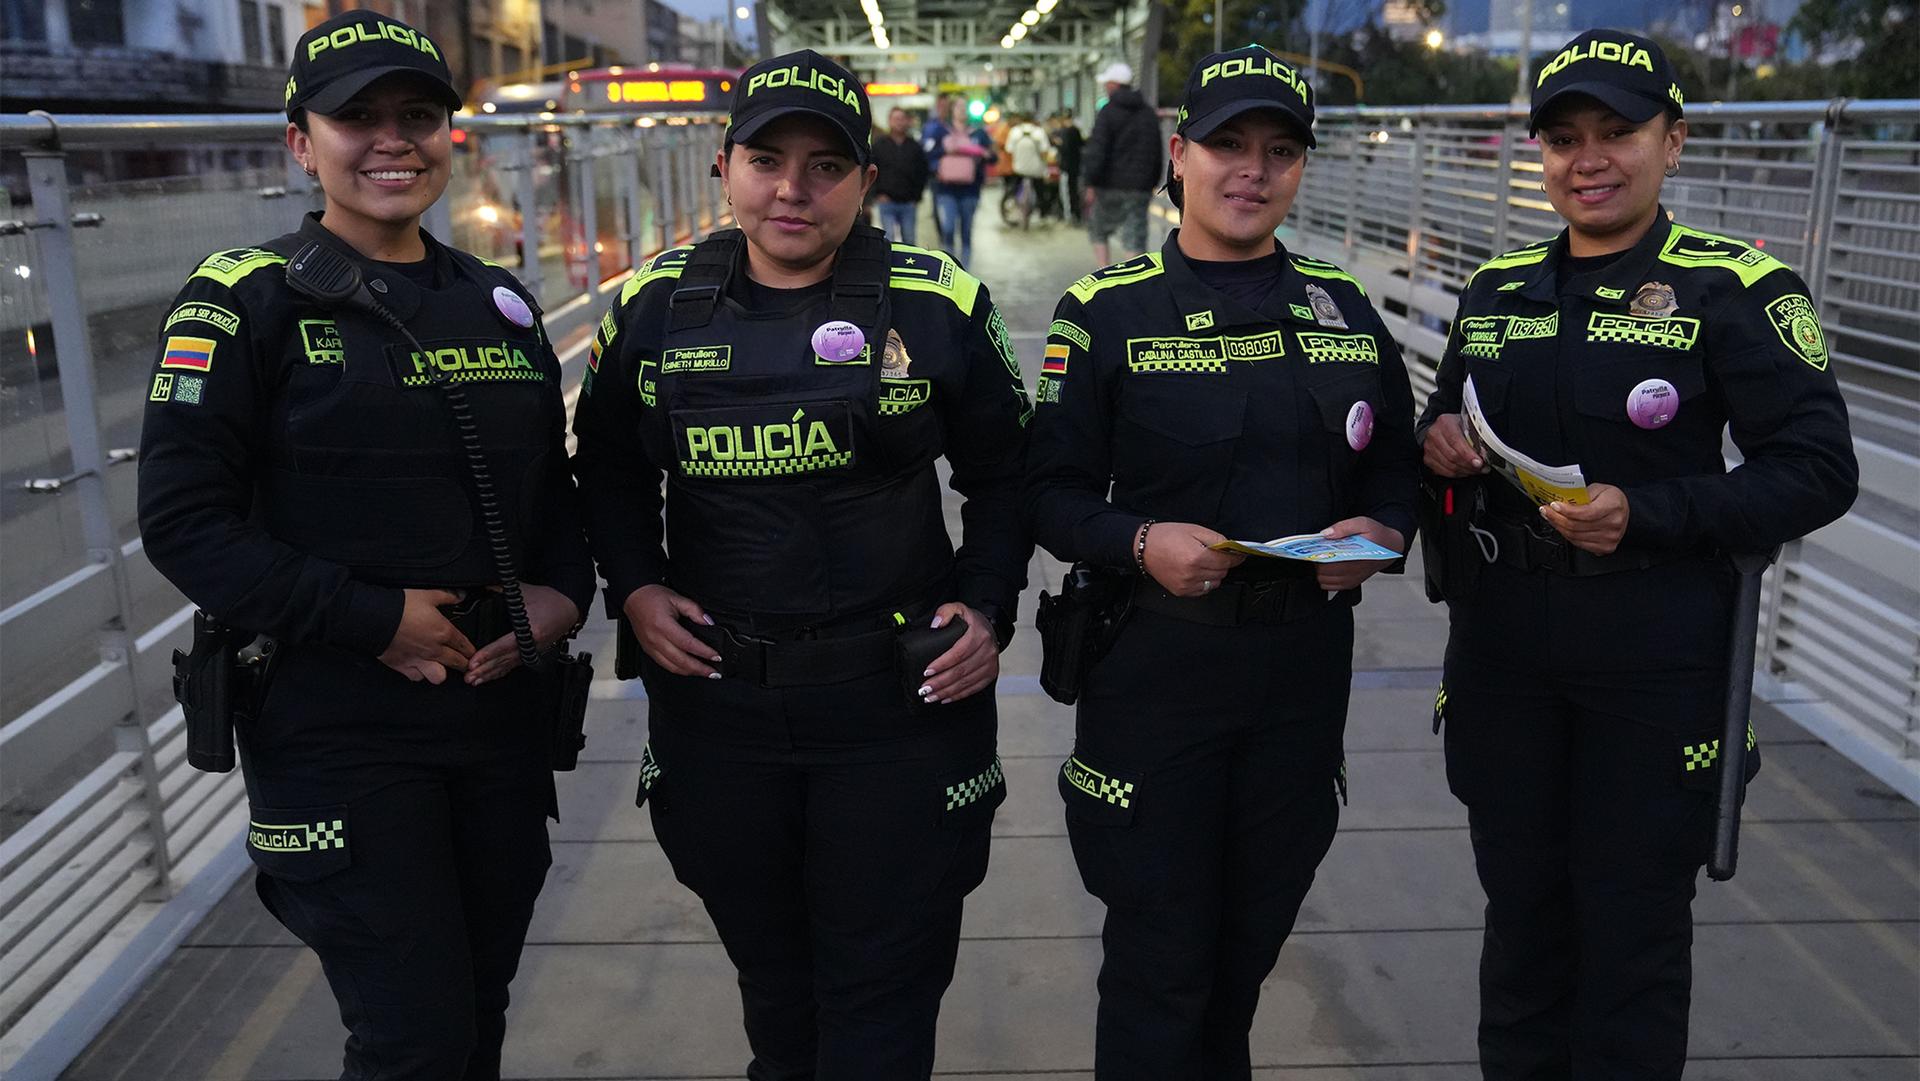 Bogota has trained more than 500 police officers to respond to cases of gender-based violence, known as the purple patrol.